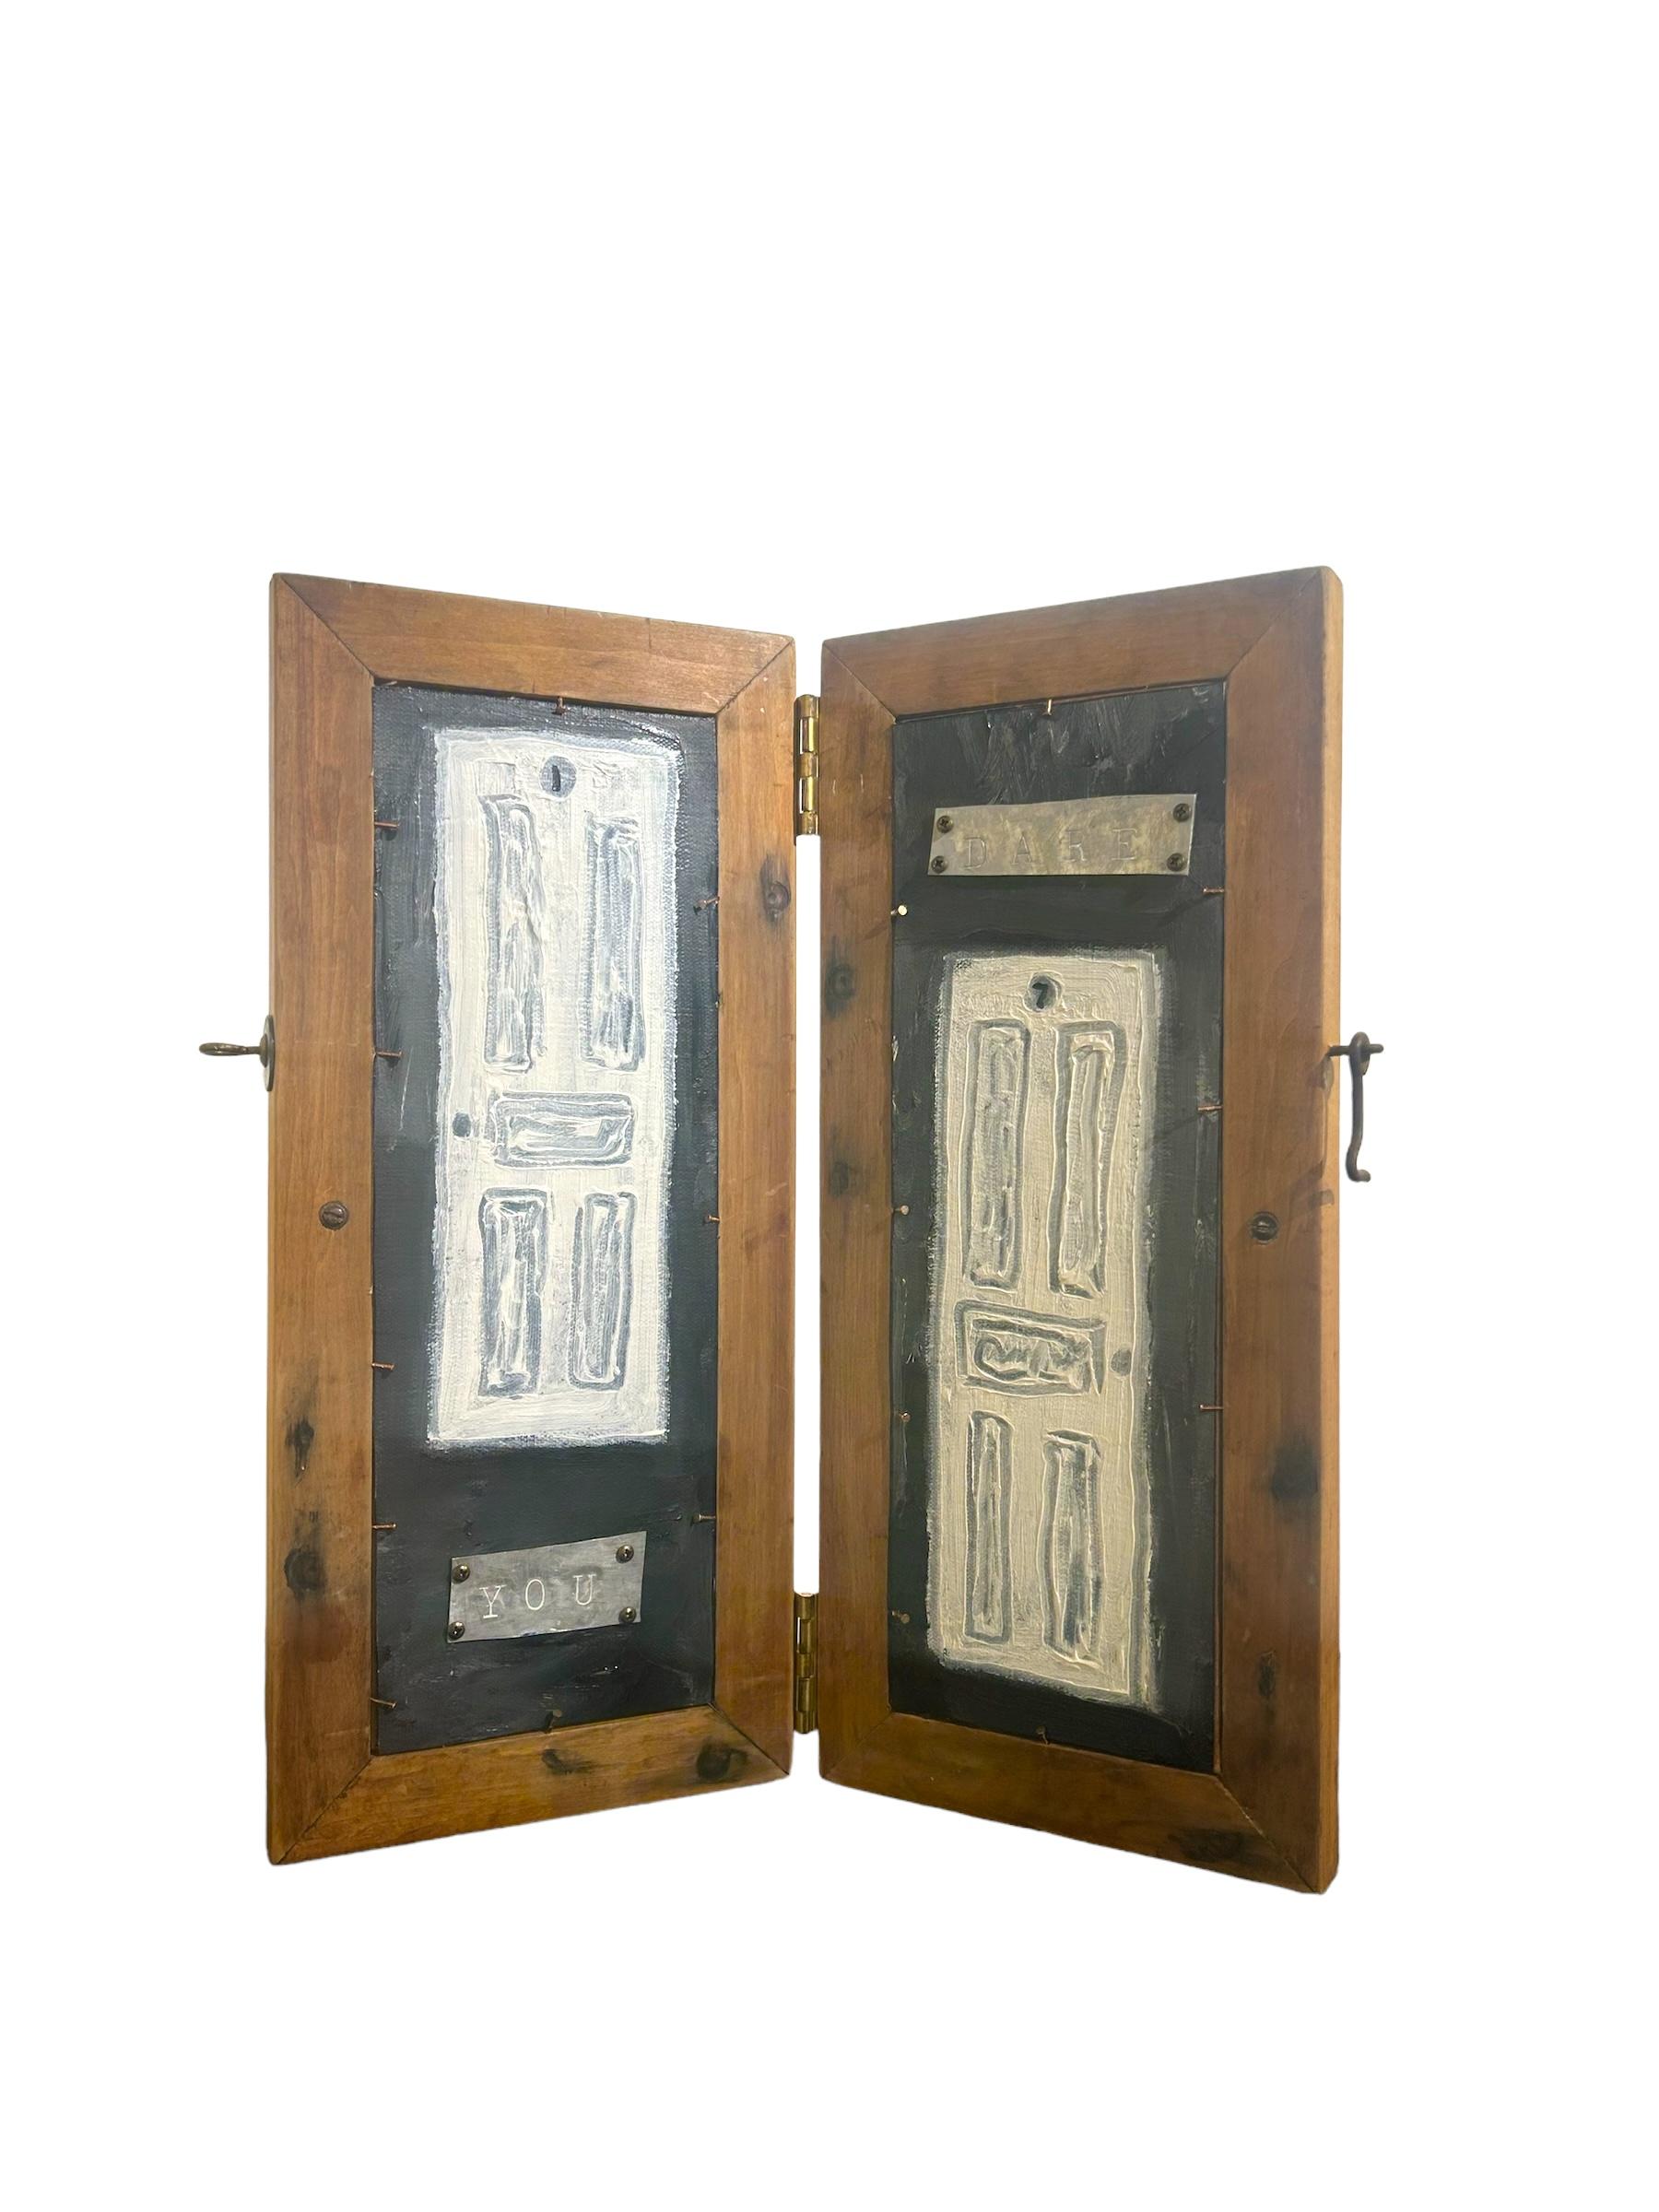 Self-taught artist John Seubert, AKA John Dolly, repurposes objects he uncovers as he rehabs older homes in Chicago. Here, multiple paintings depicting doors are hinged together with stamped title plates. When 